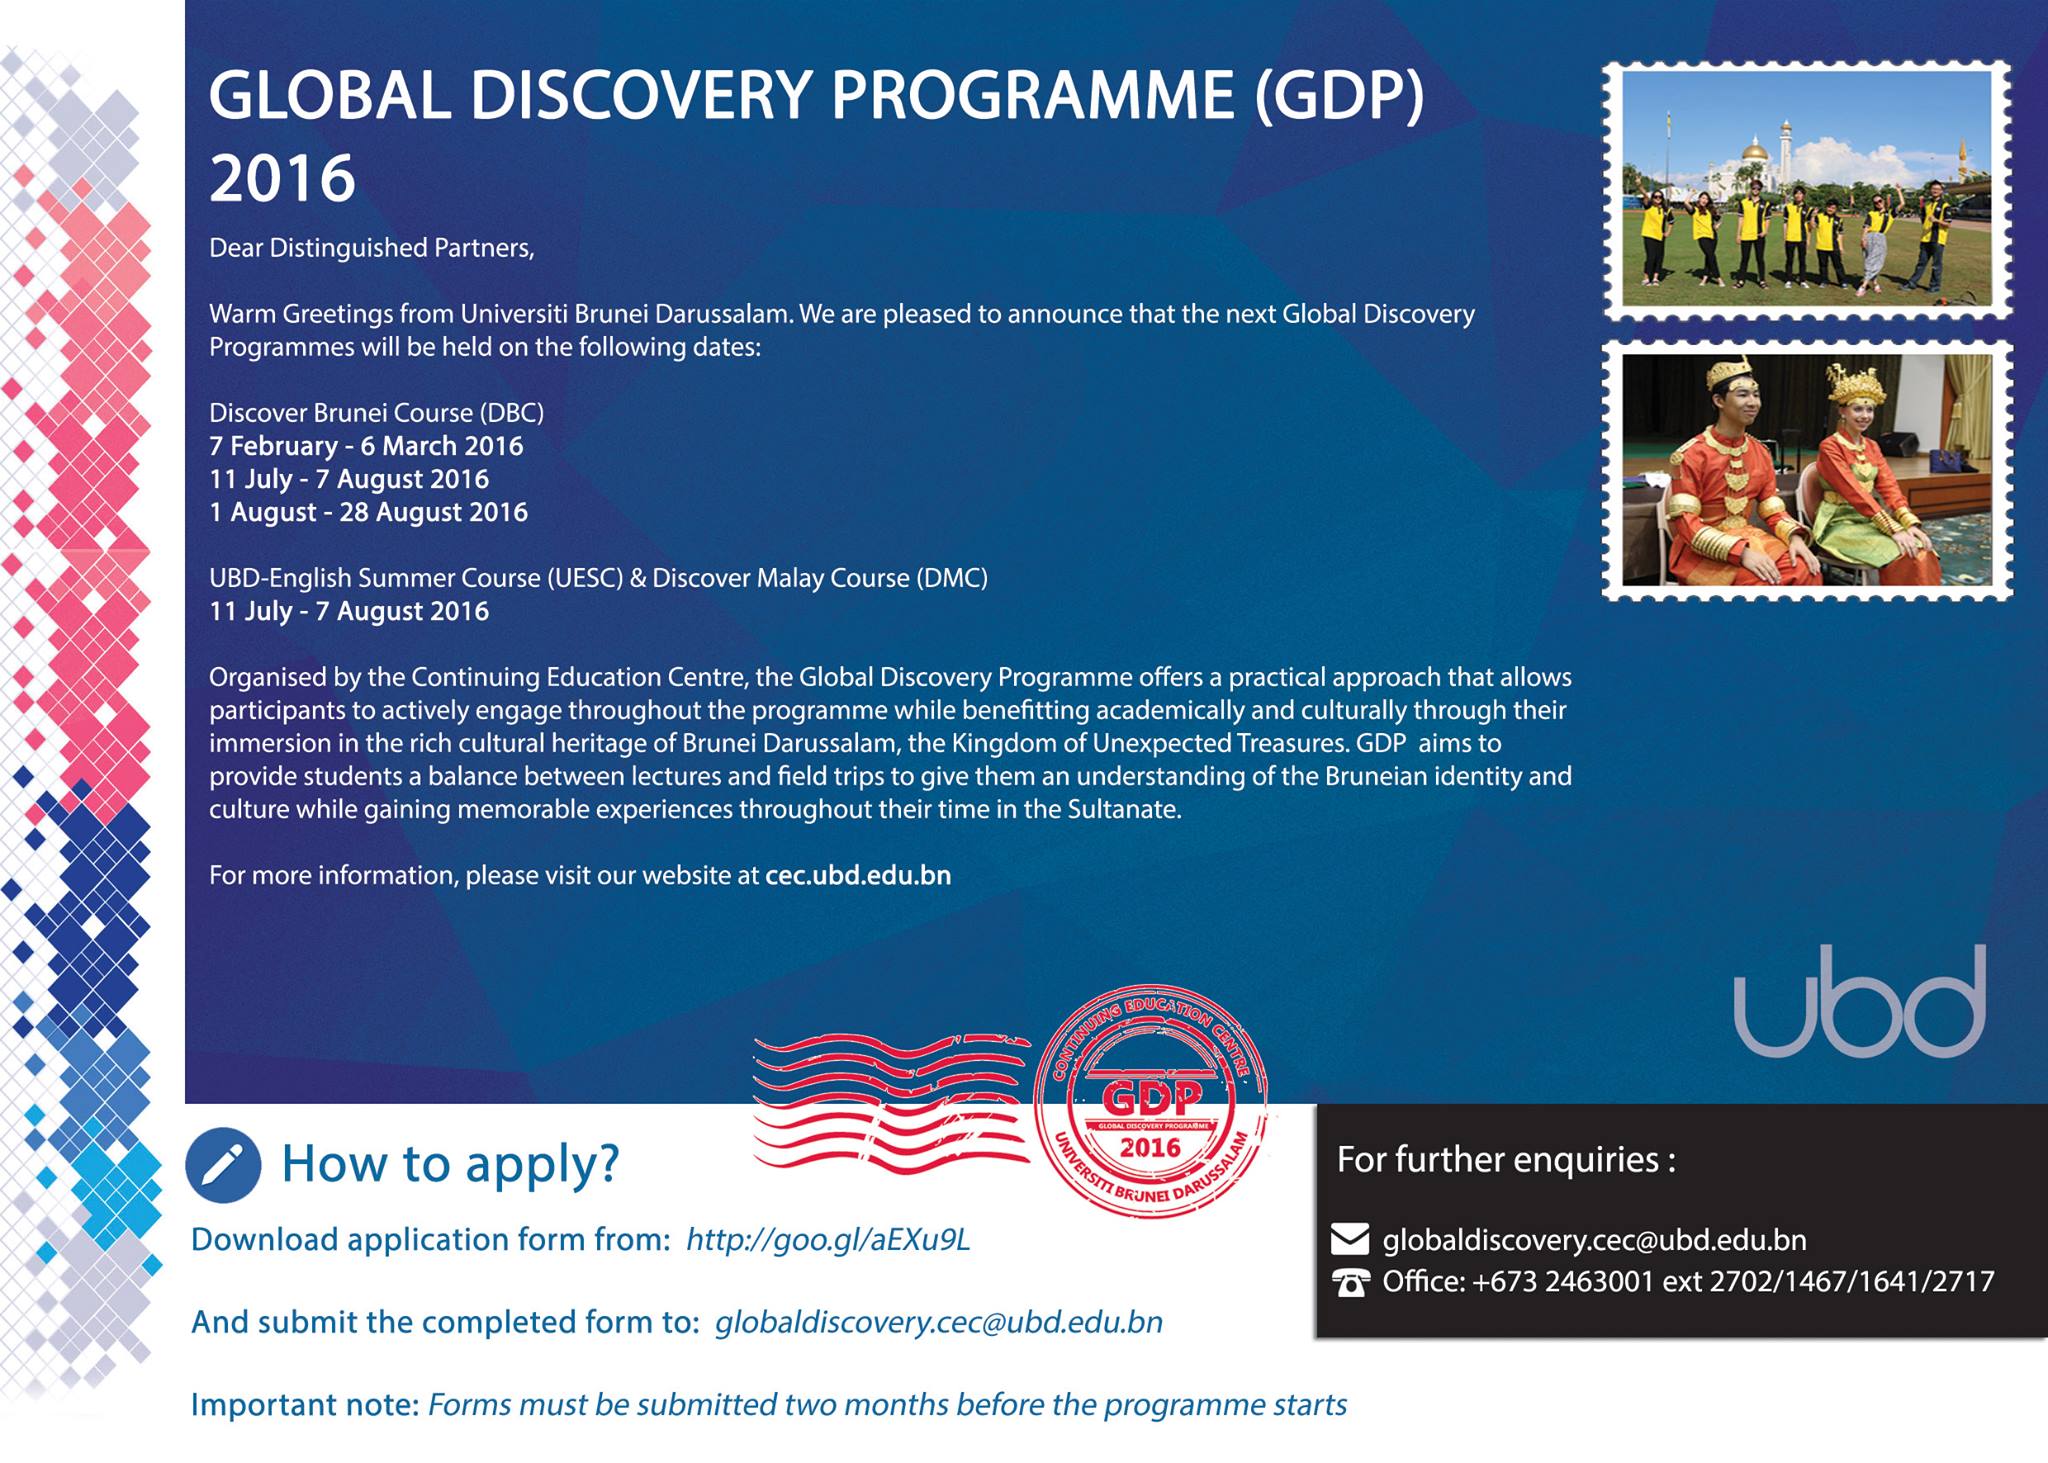 INVITATION FOR THE GLOBAL DISCOVERY PROGRAMME 2016 OF BRUNEI DARUSSALAM UNIVERSITY